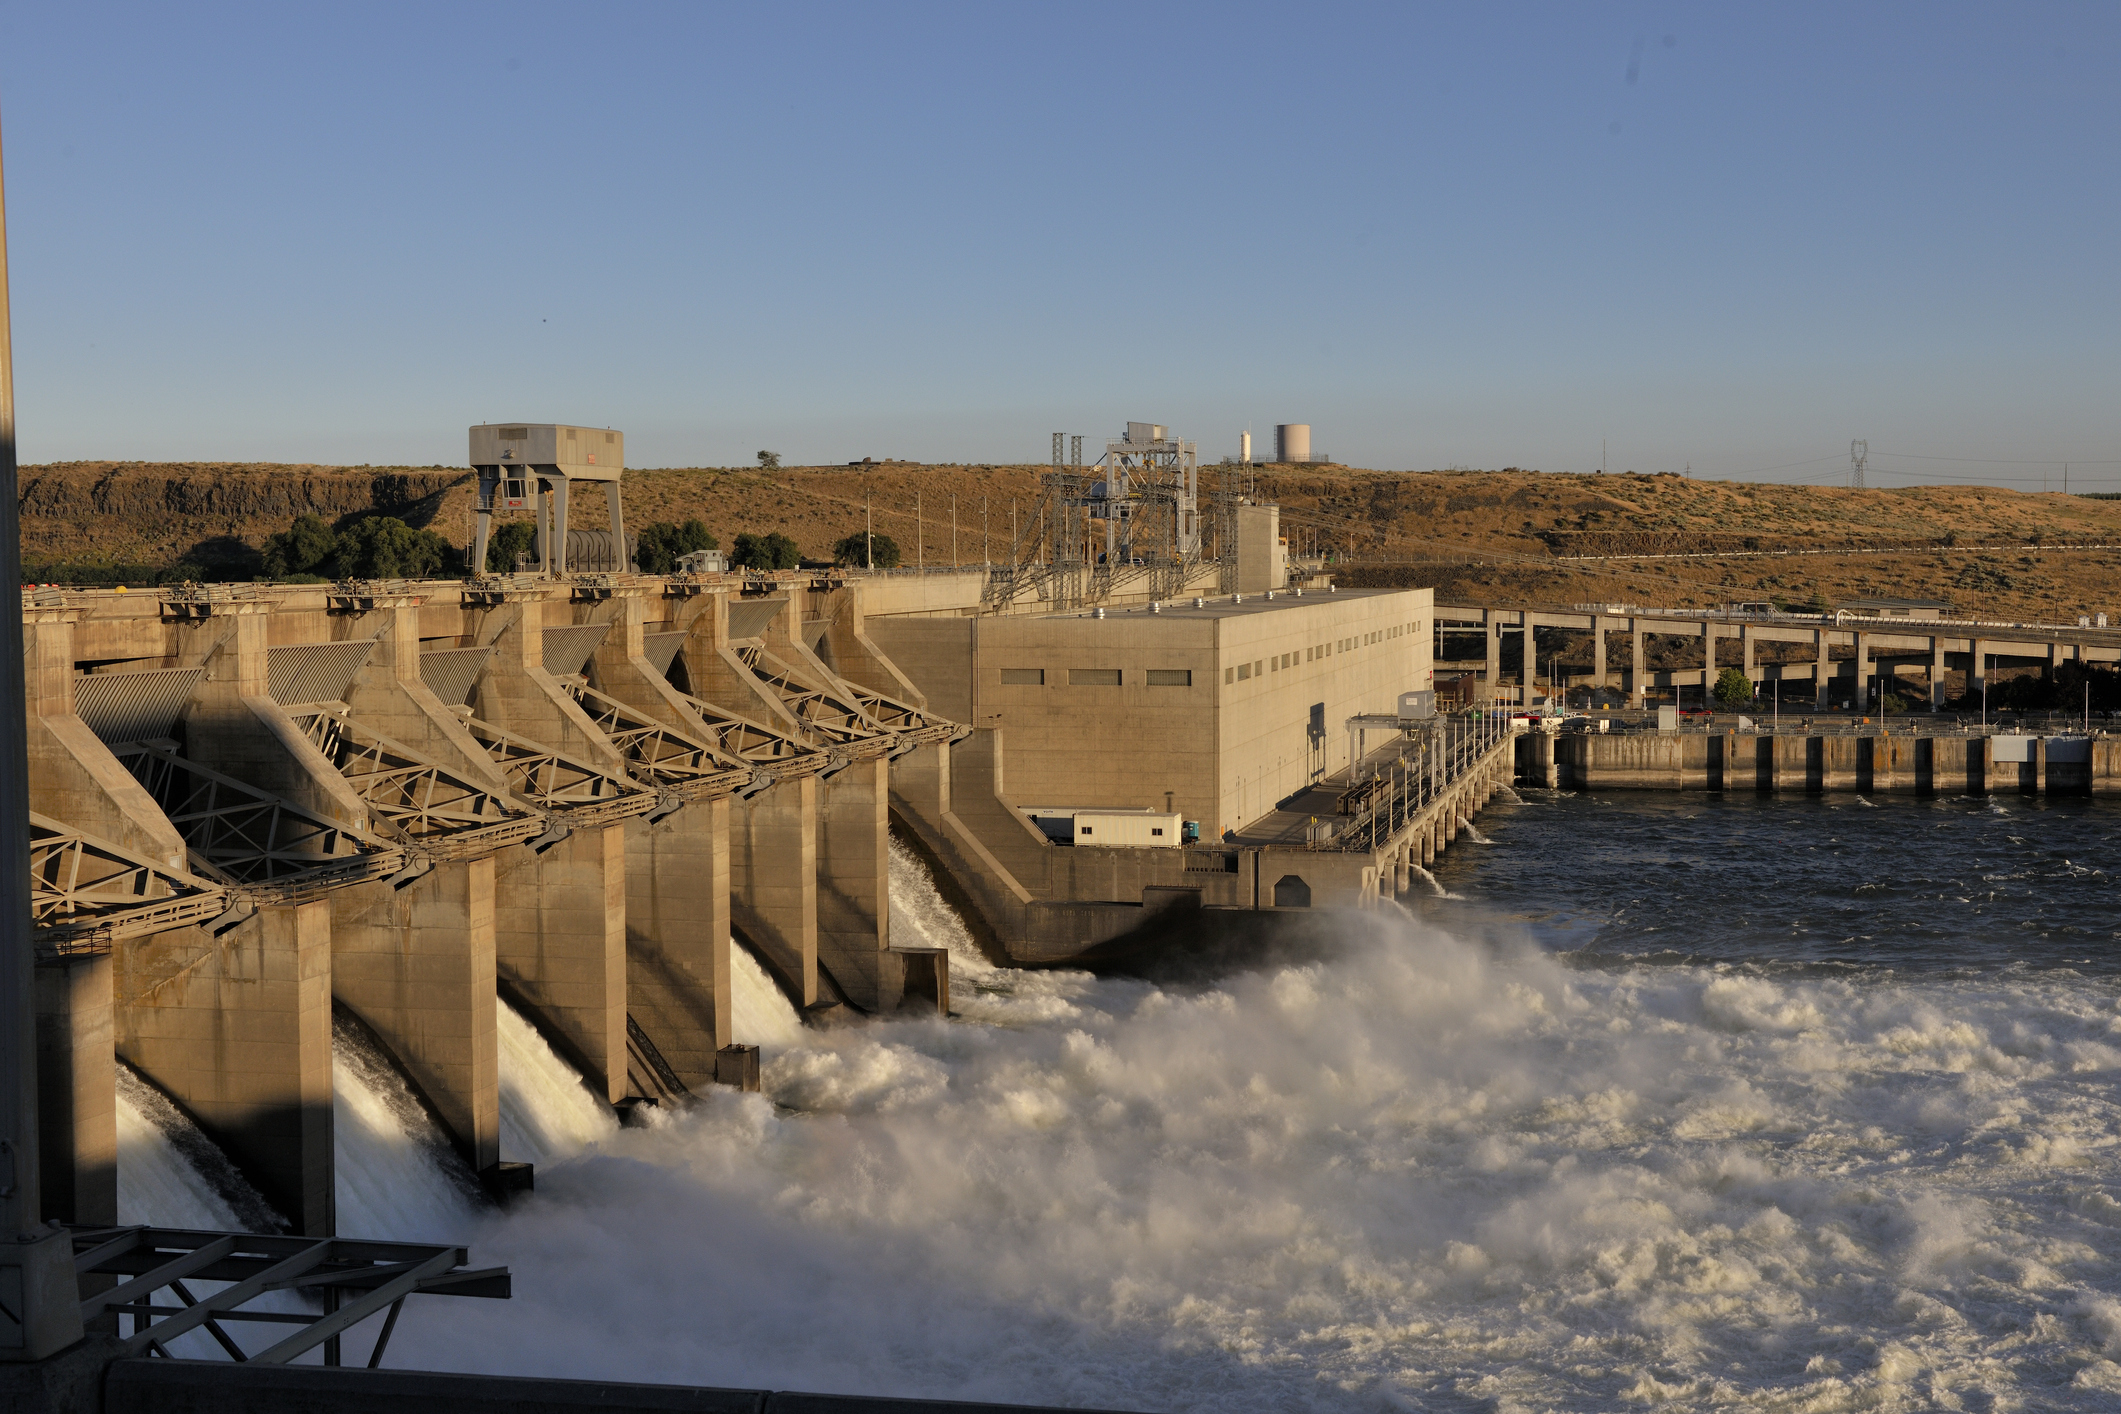 Ice Harbor Dam on the Lower Snake River System in Washington state.